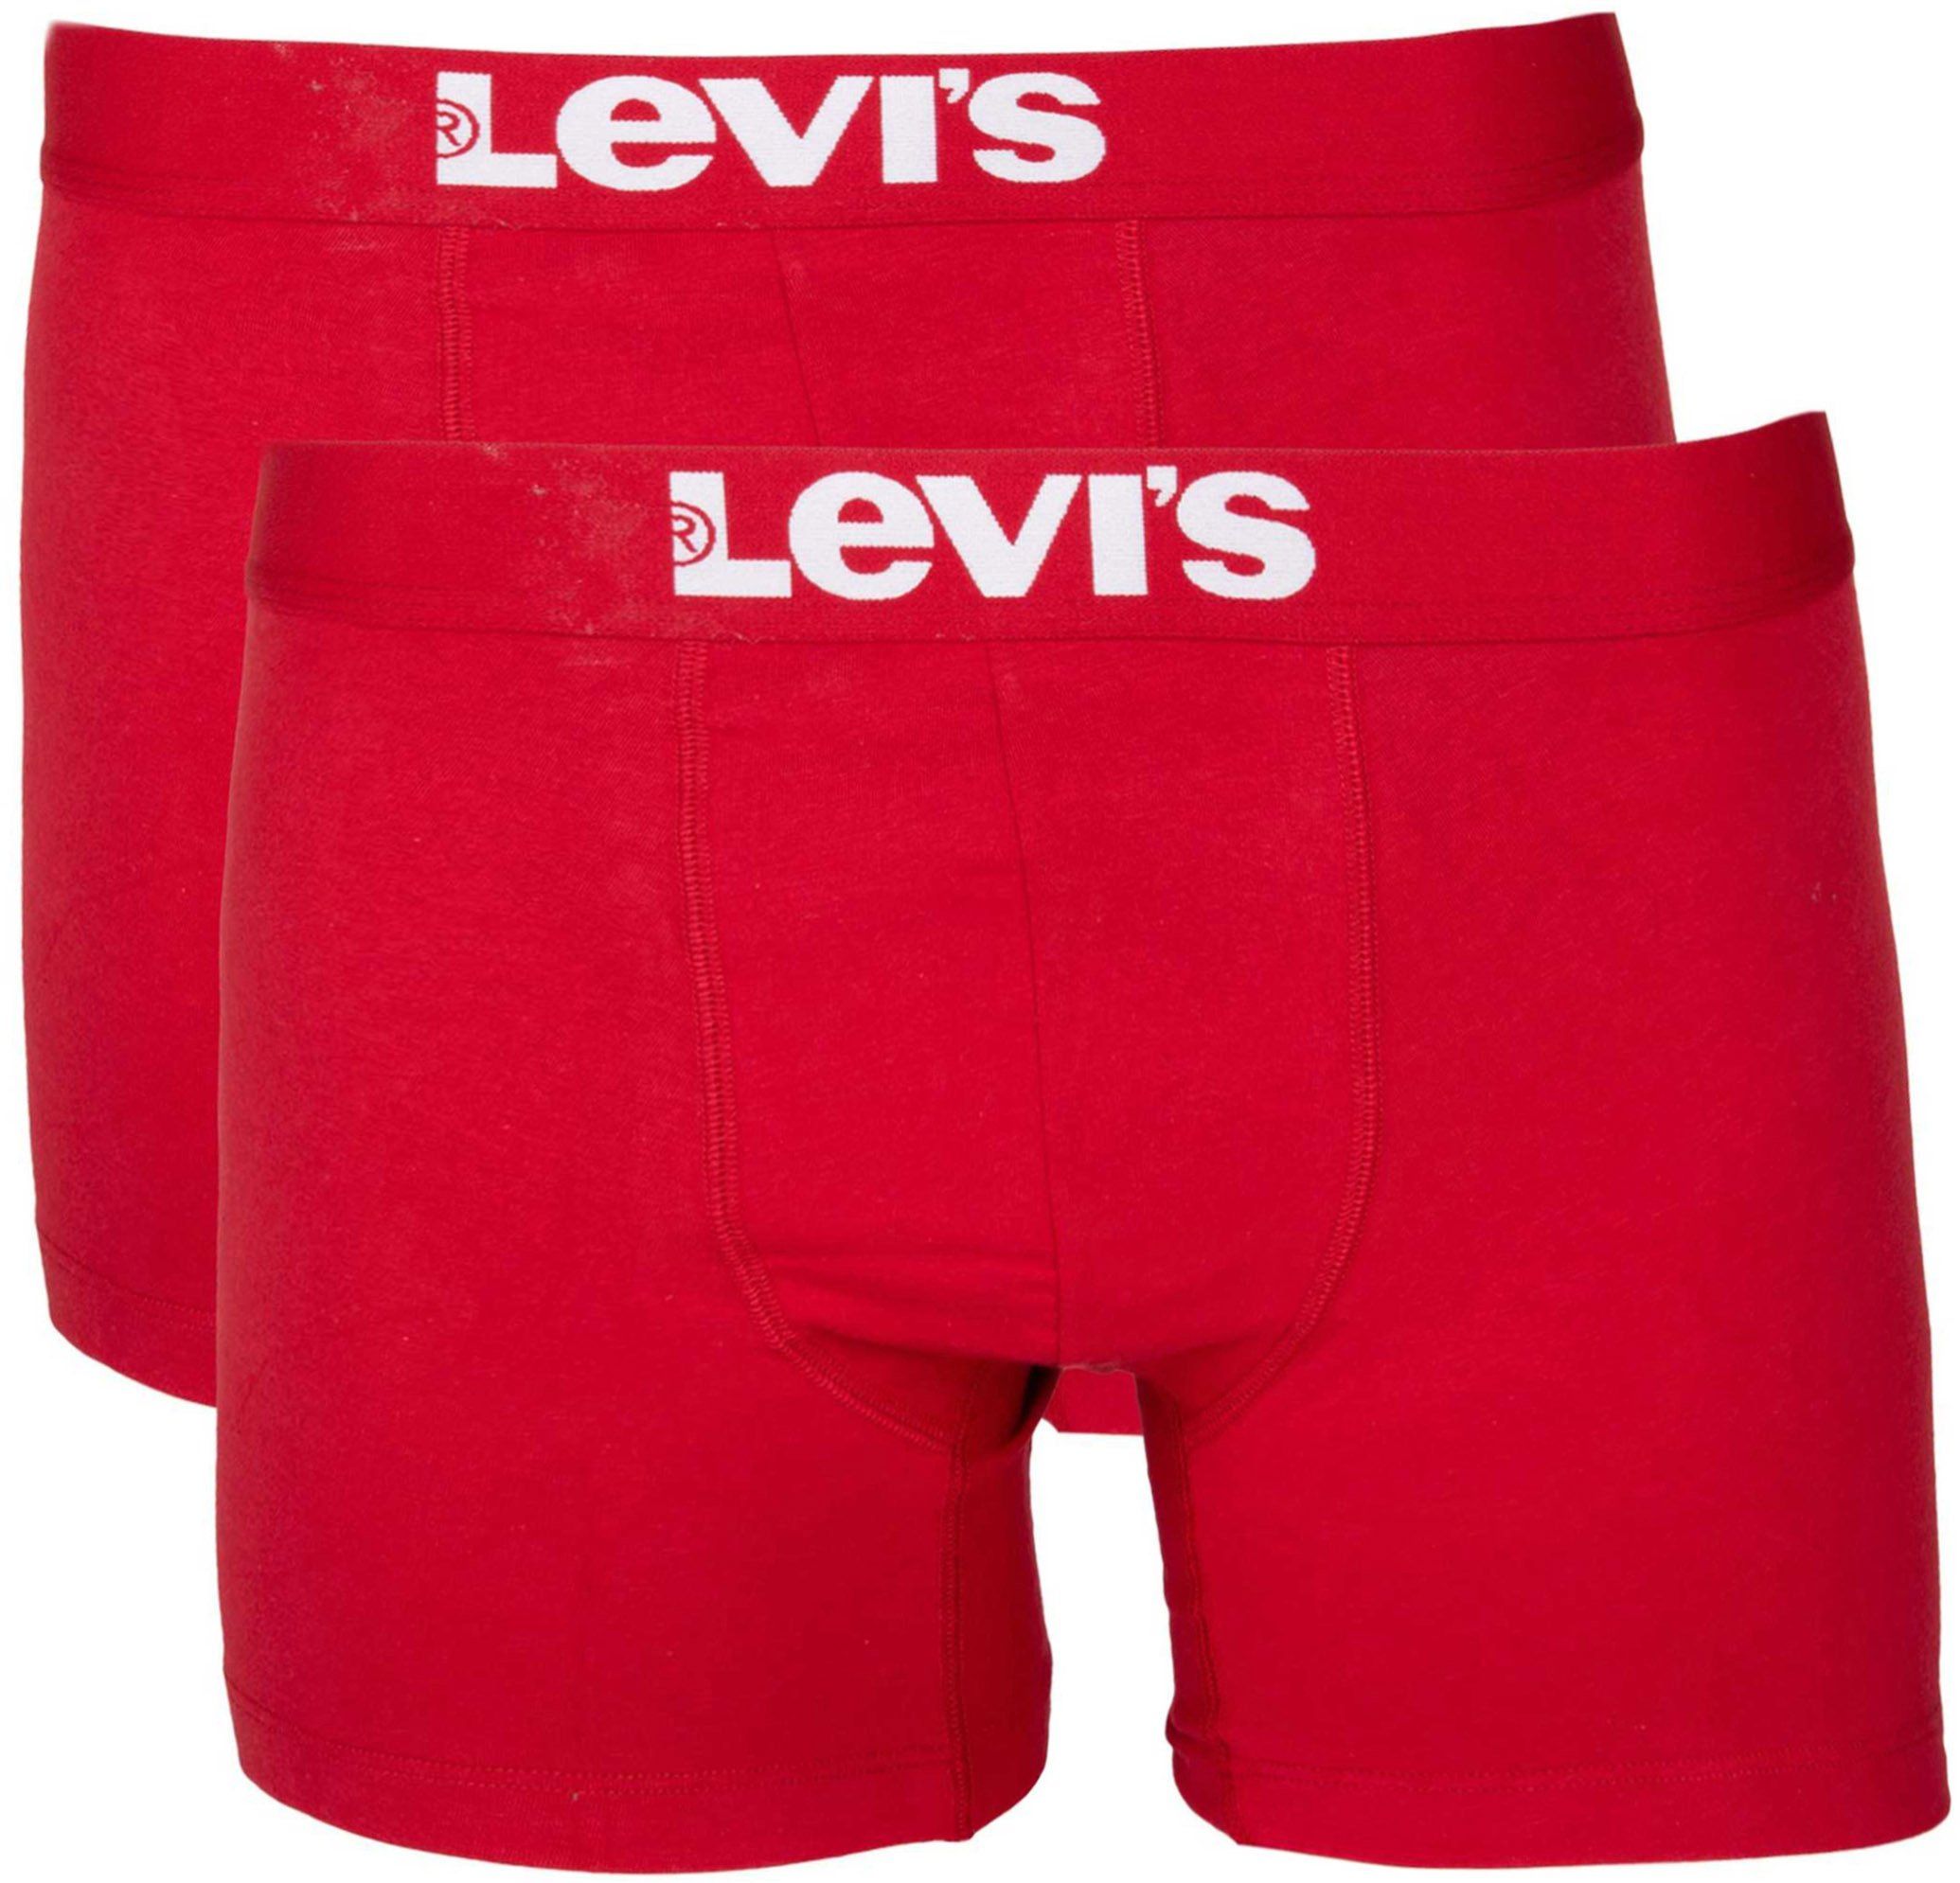 Levi's Boxer Shorts 2-Pack Chili Red size S